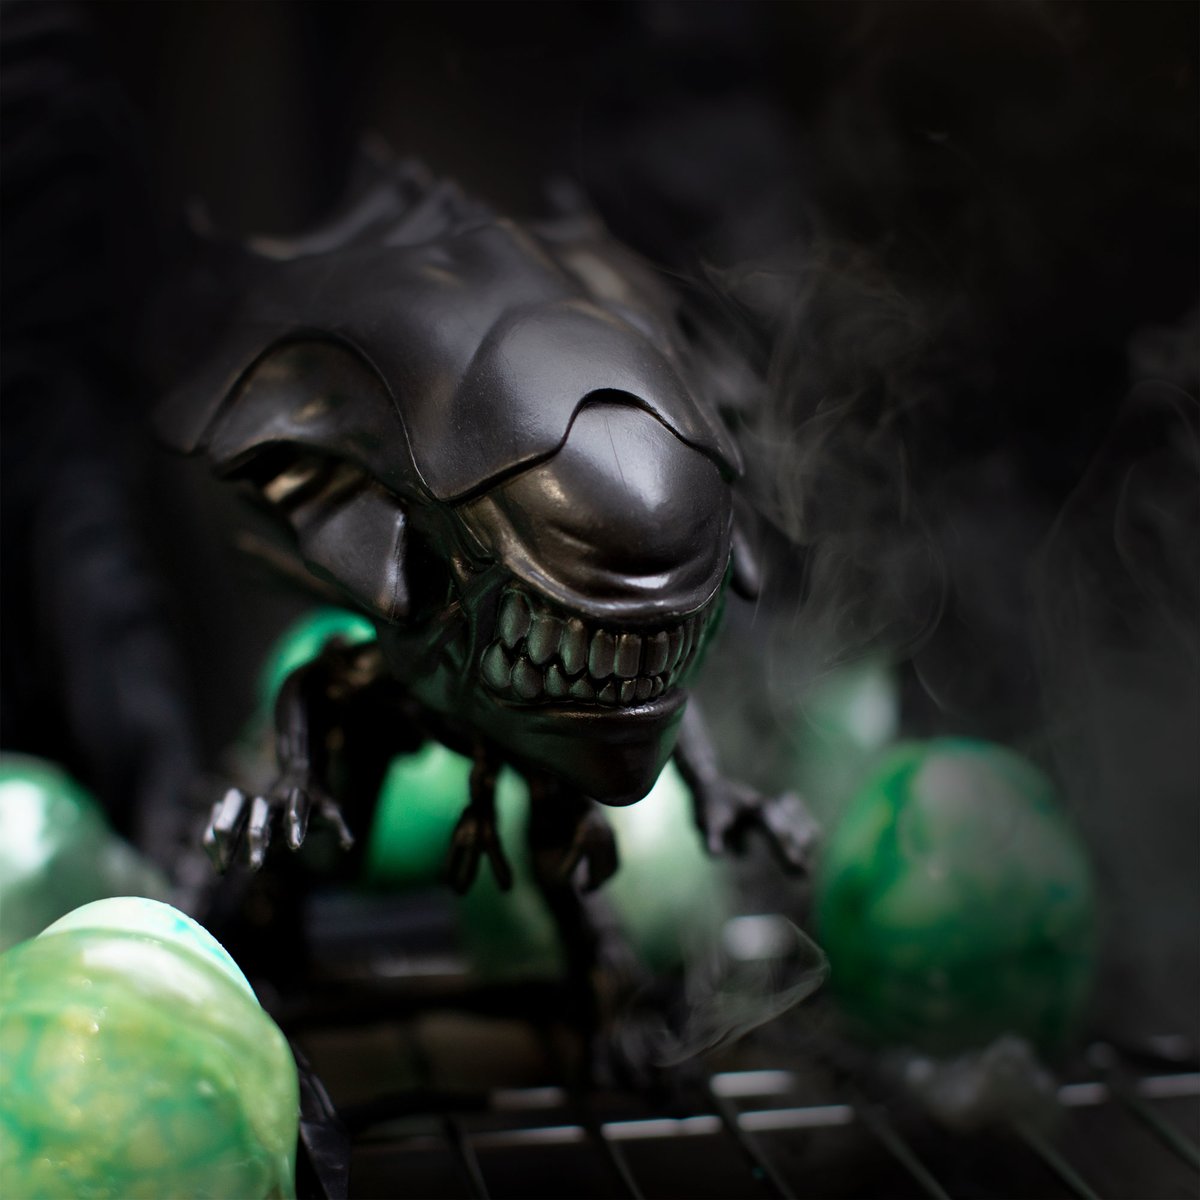 Expand your collection with Funko Pop! figures inspired by the Alien franchise.